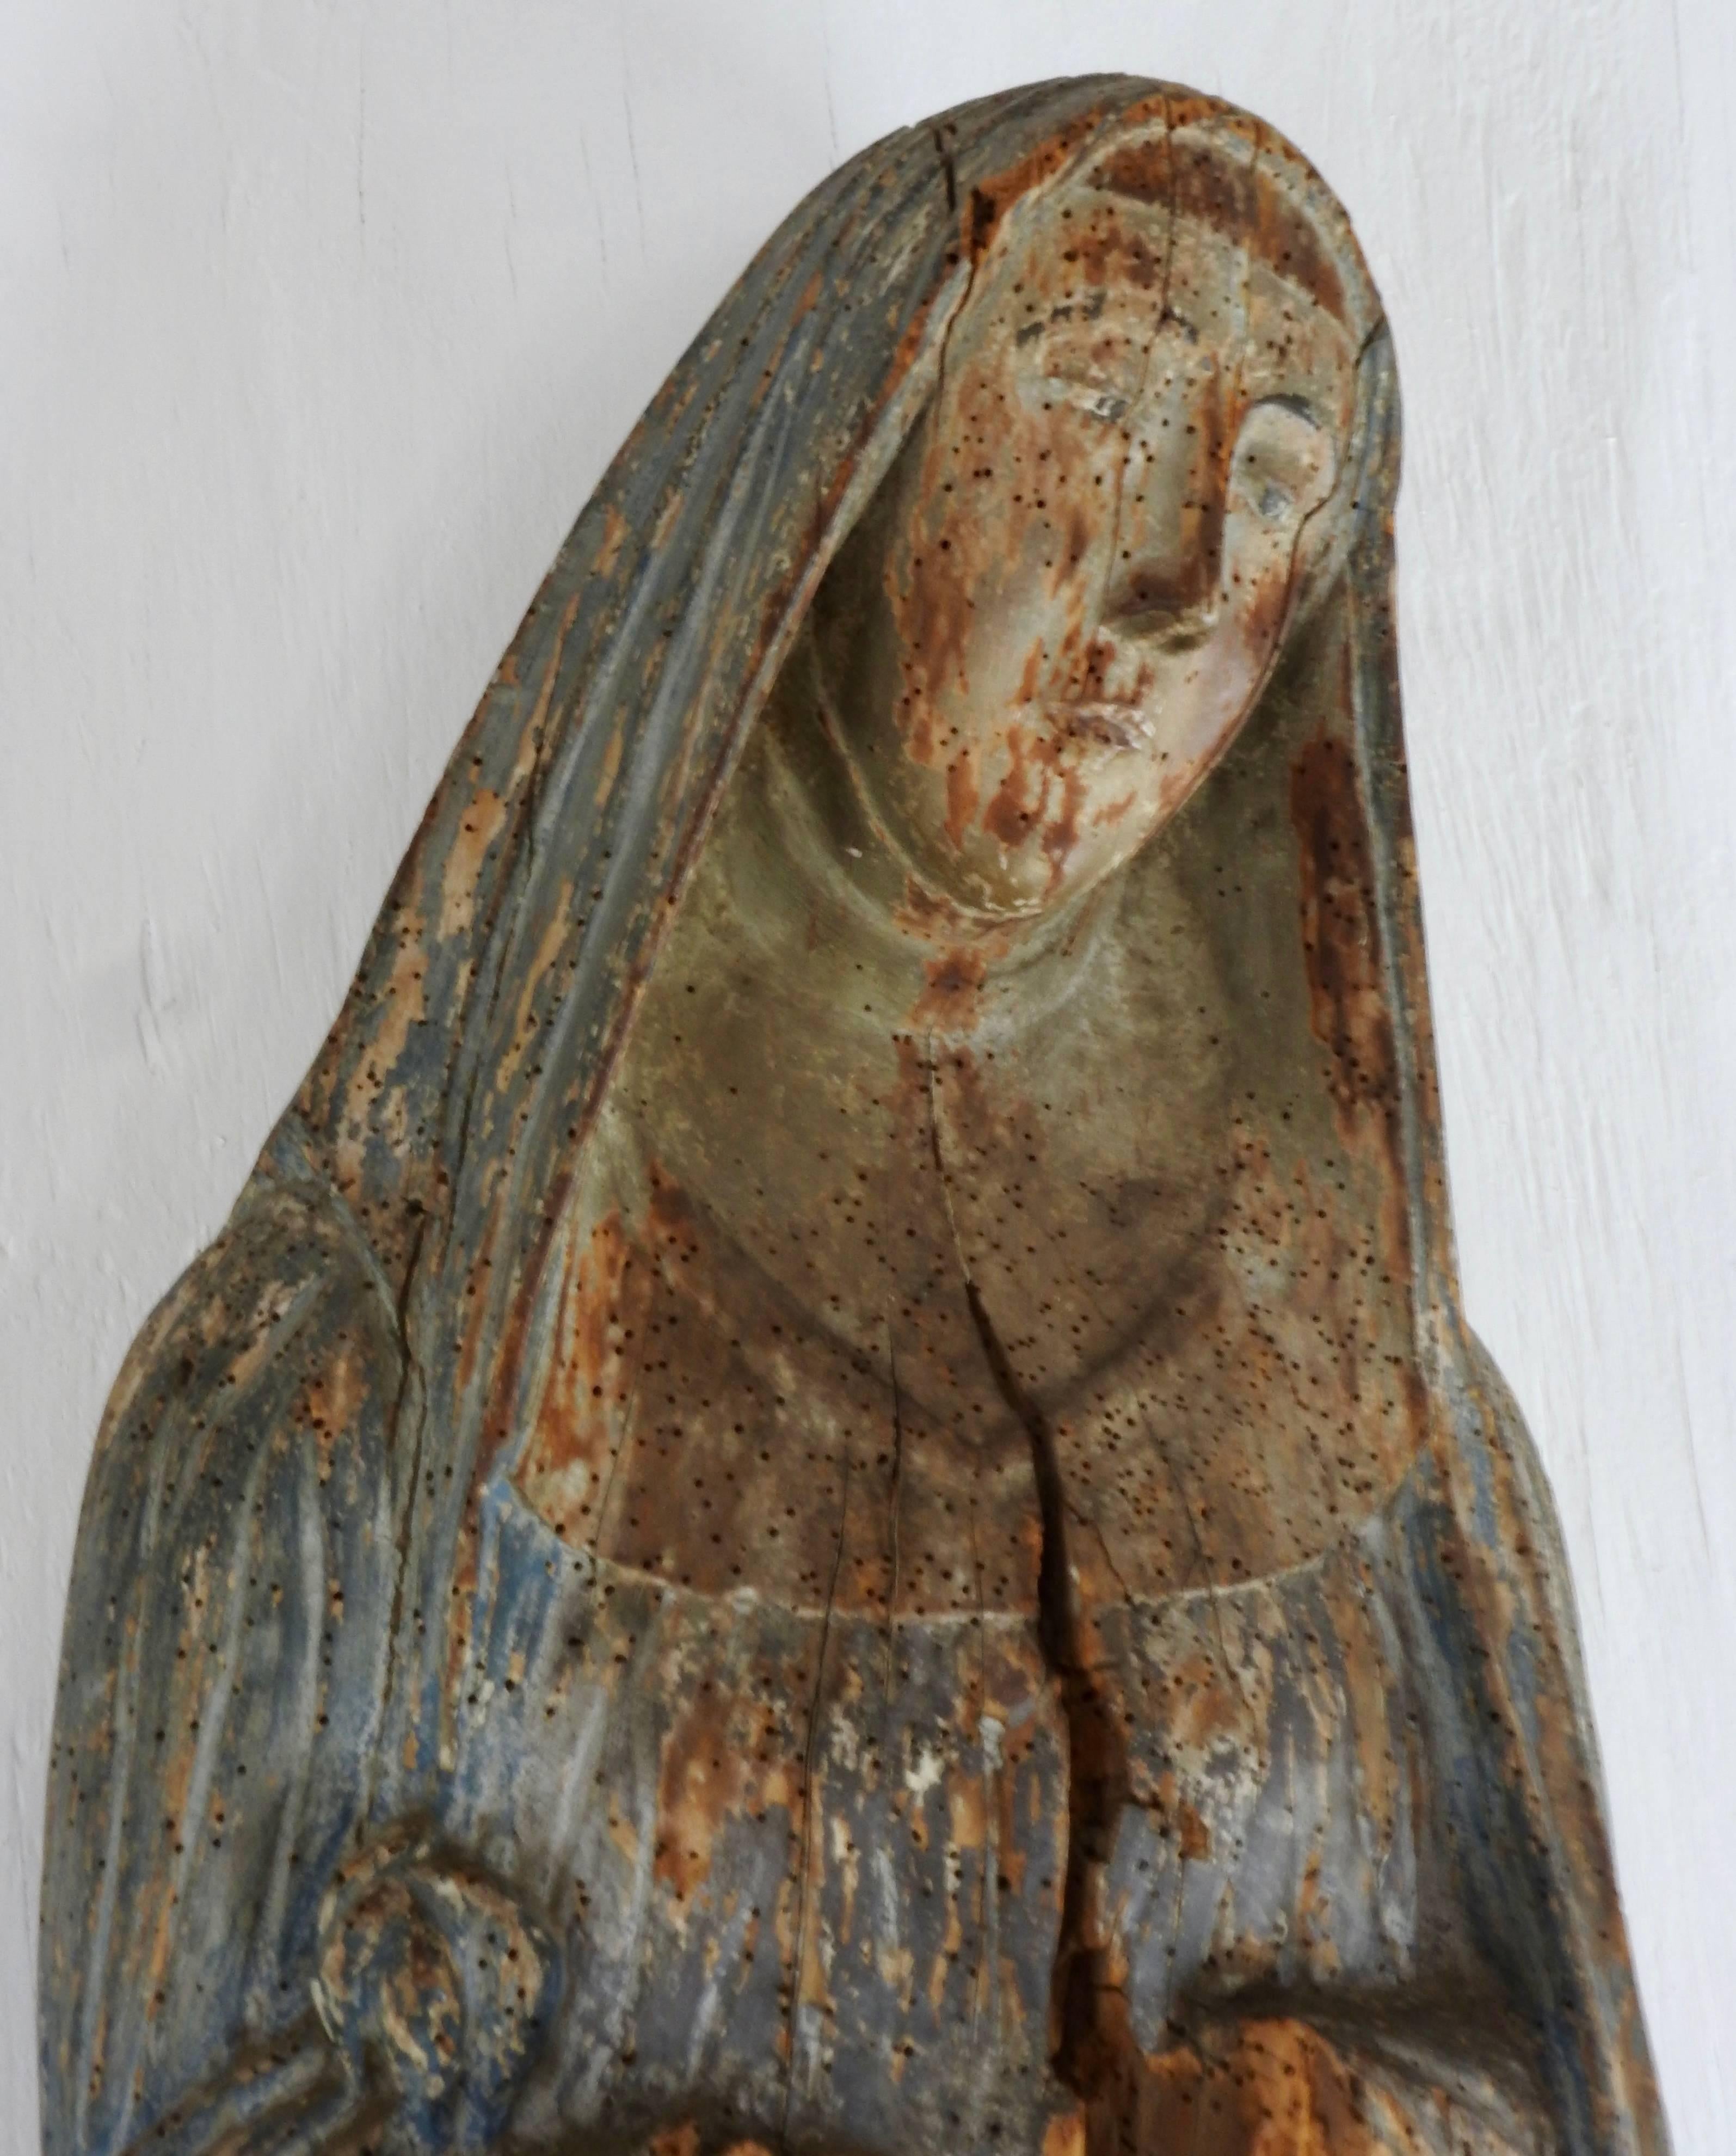 Primitive wood carving of the Virgin Mary from the early 17th century. The polychrome paint has softly faded over the years. There are some splits in the wood which is characteristic of the age of the piece. Her hands are missing. The back is open